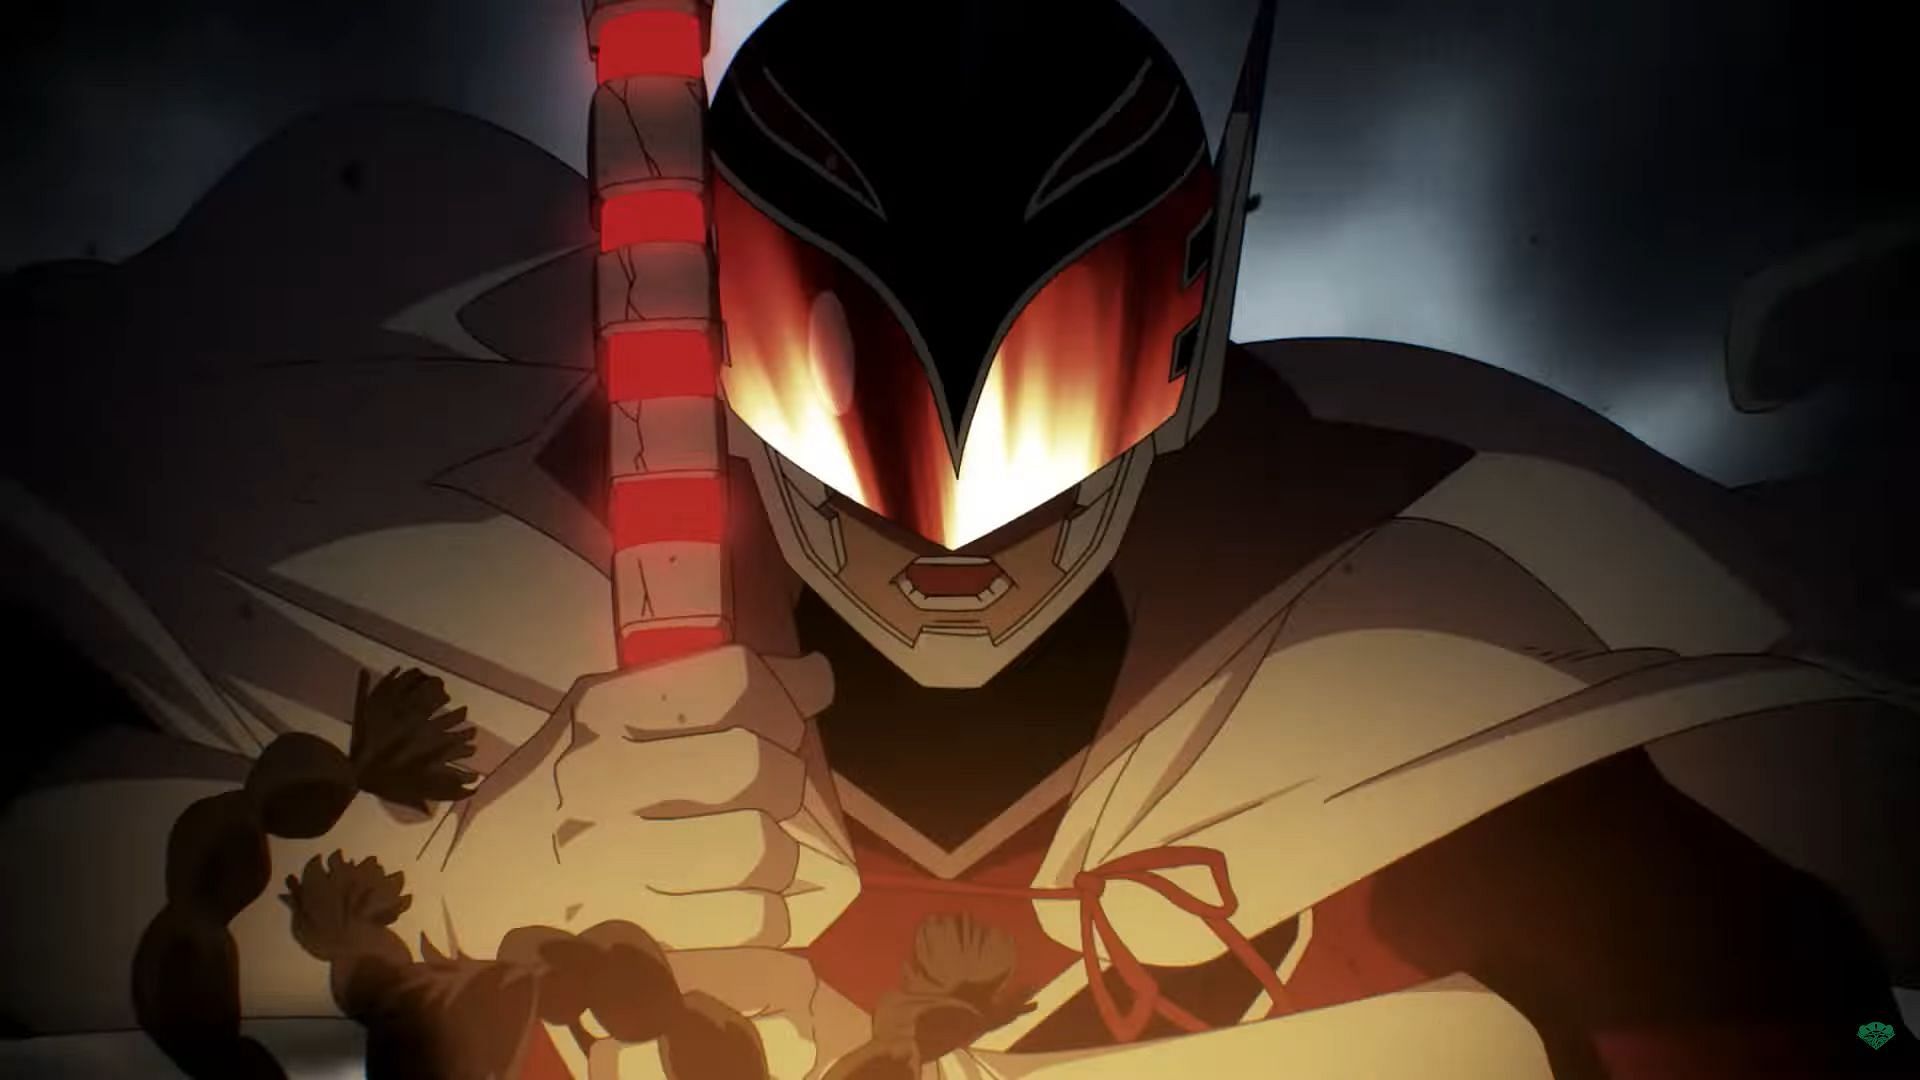 New Anime is Basically the Dark Power Rangers Every 90s Kid Dreamed Of